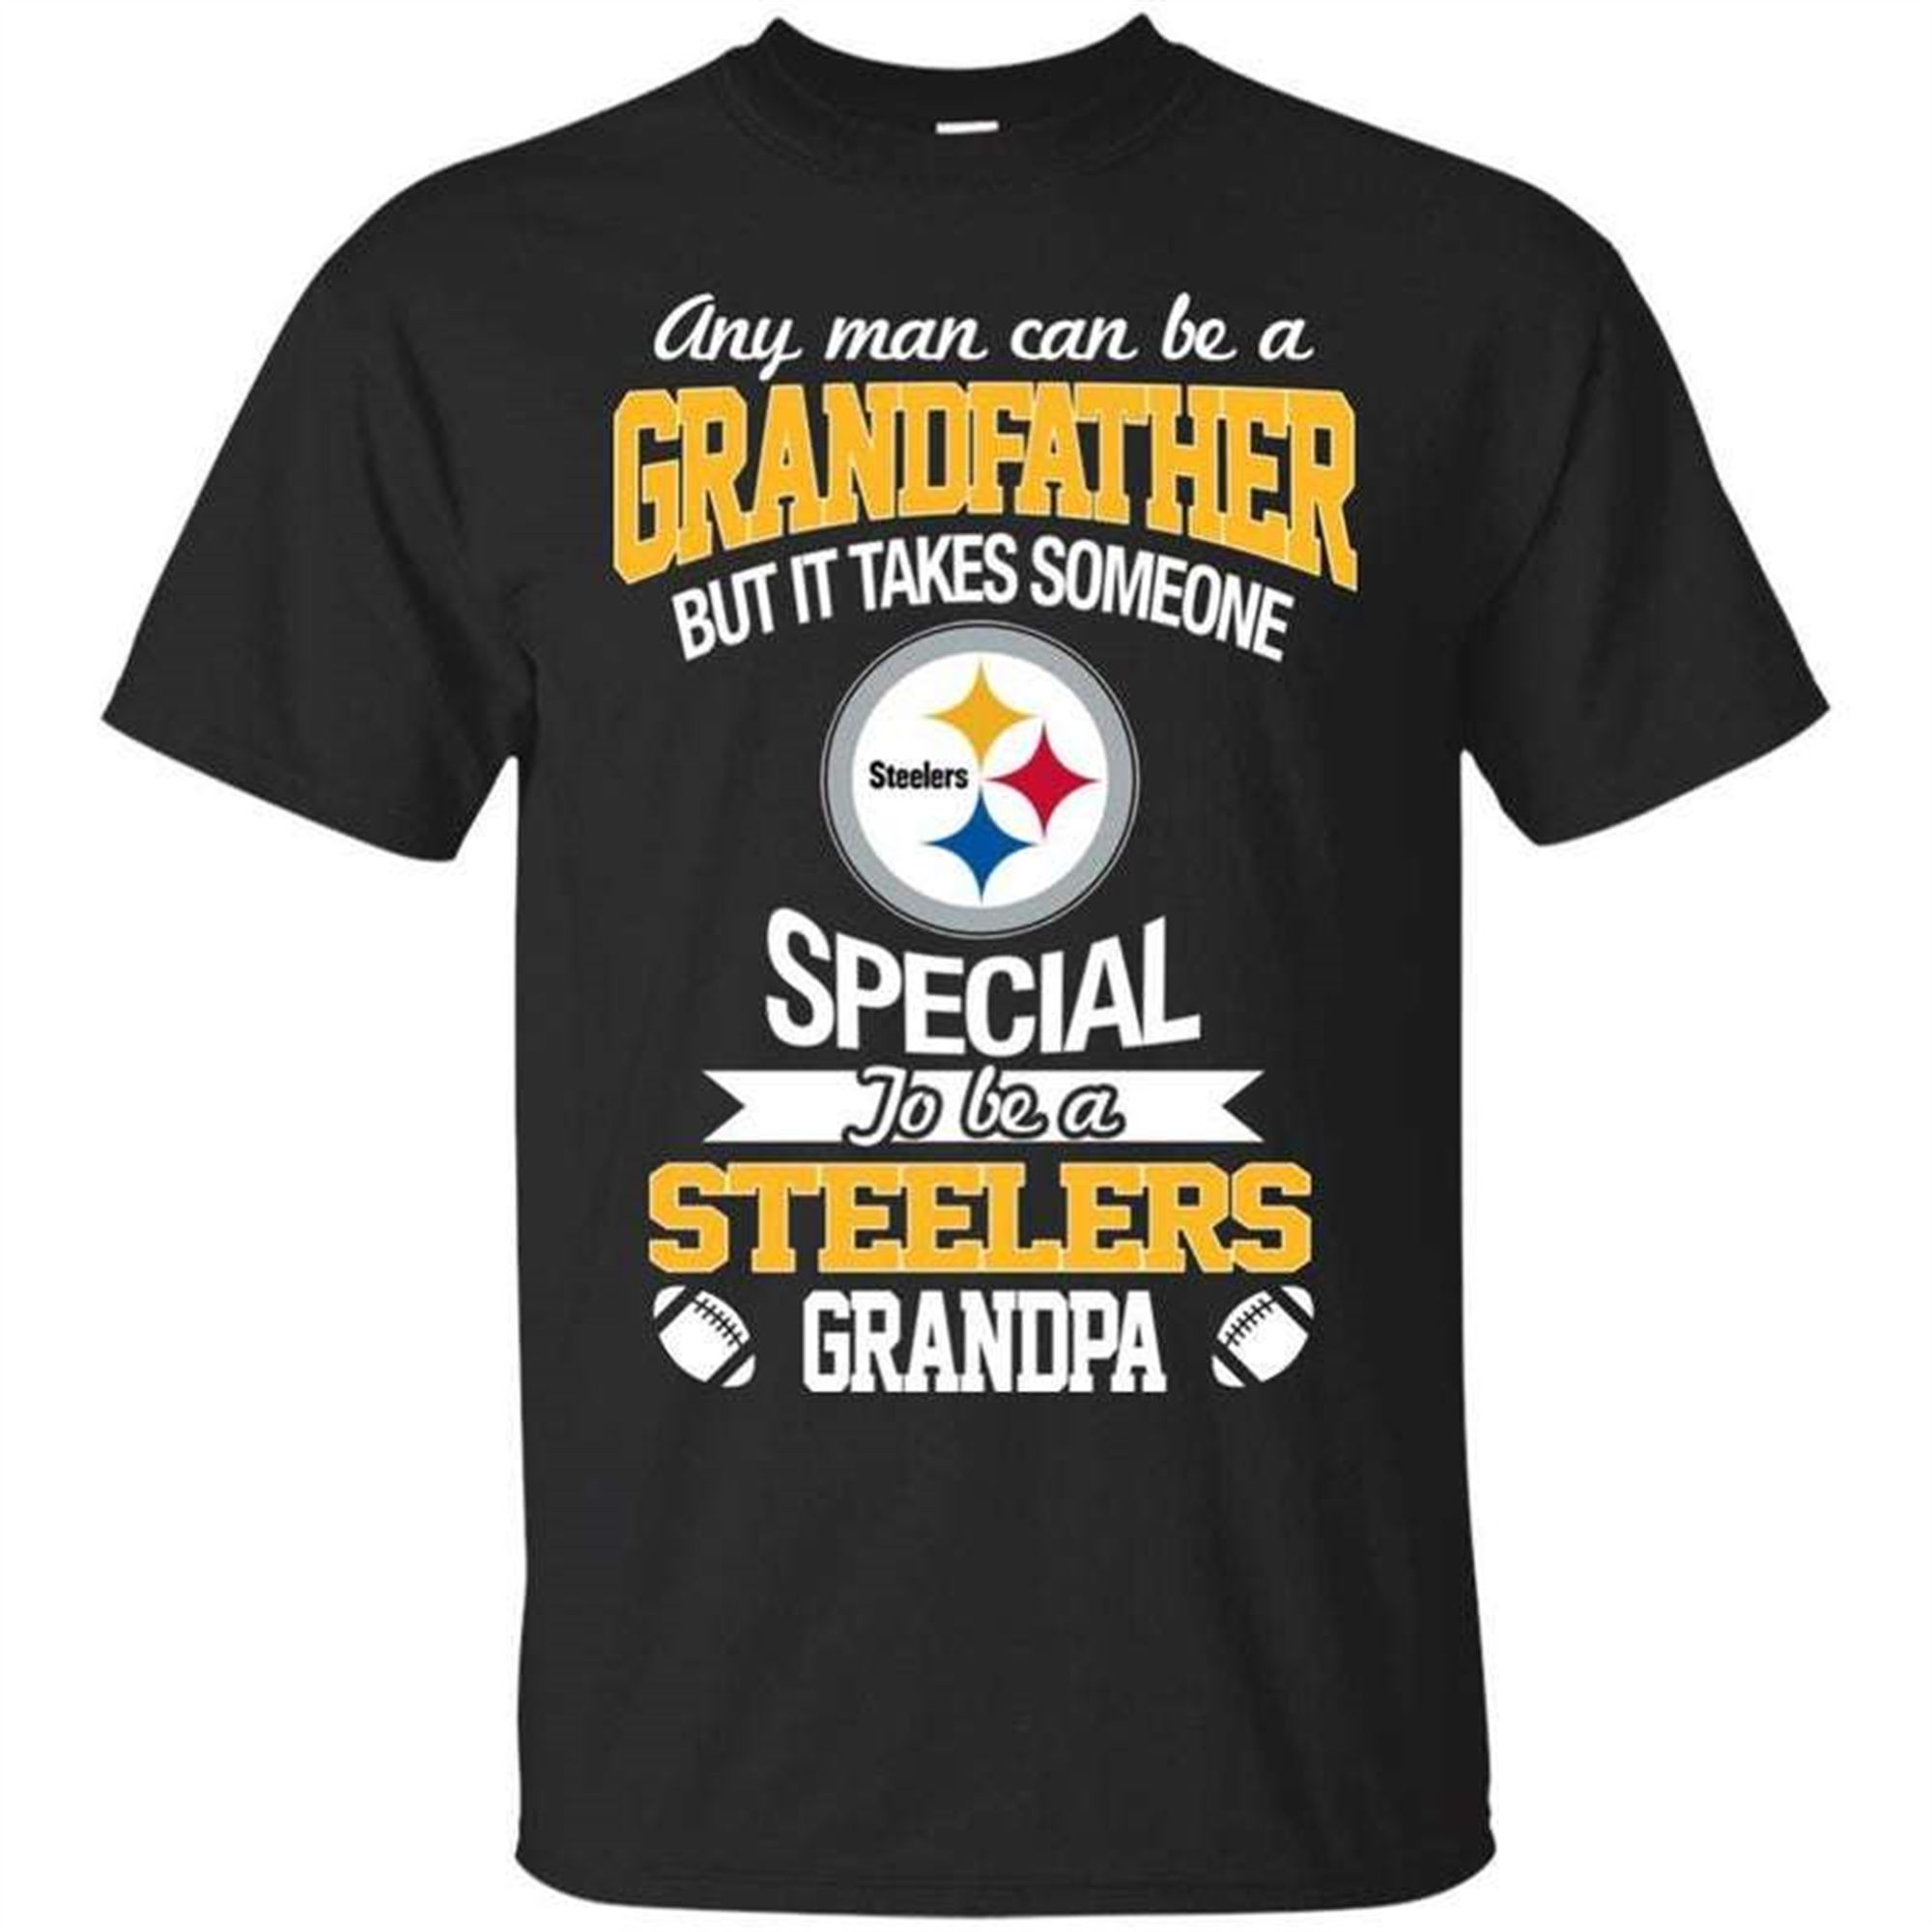 It Takes Someone Special To Be A Steelers Grandpa T-shirt Plus Size Up To 5x